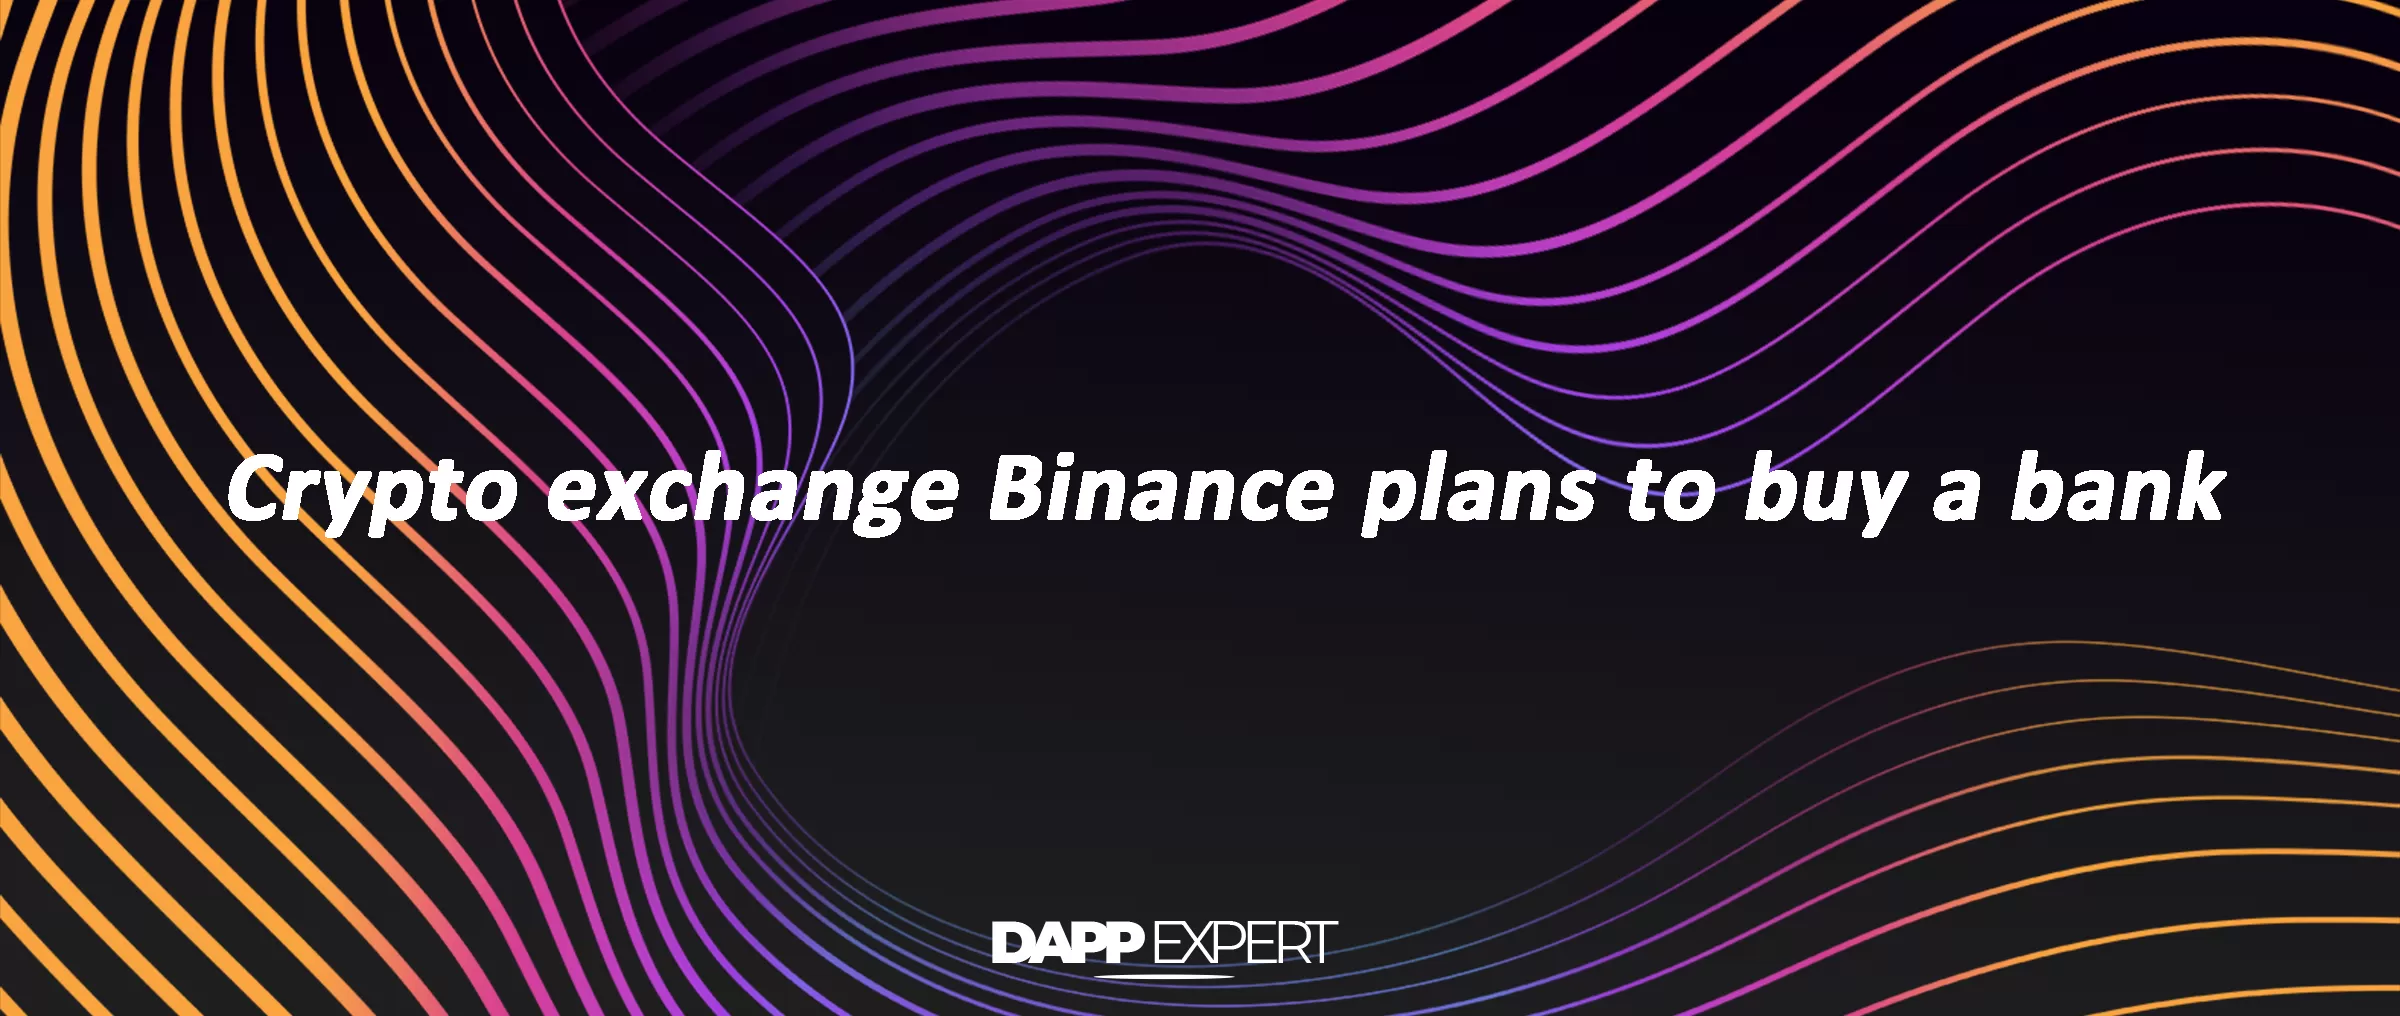 Crypto exchange Binance plans to buy a bank